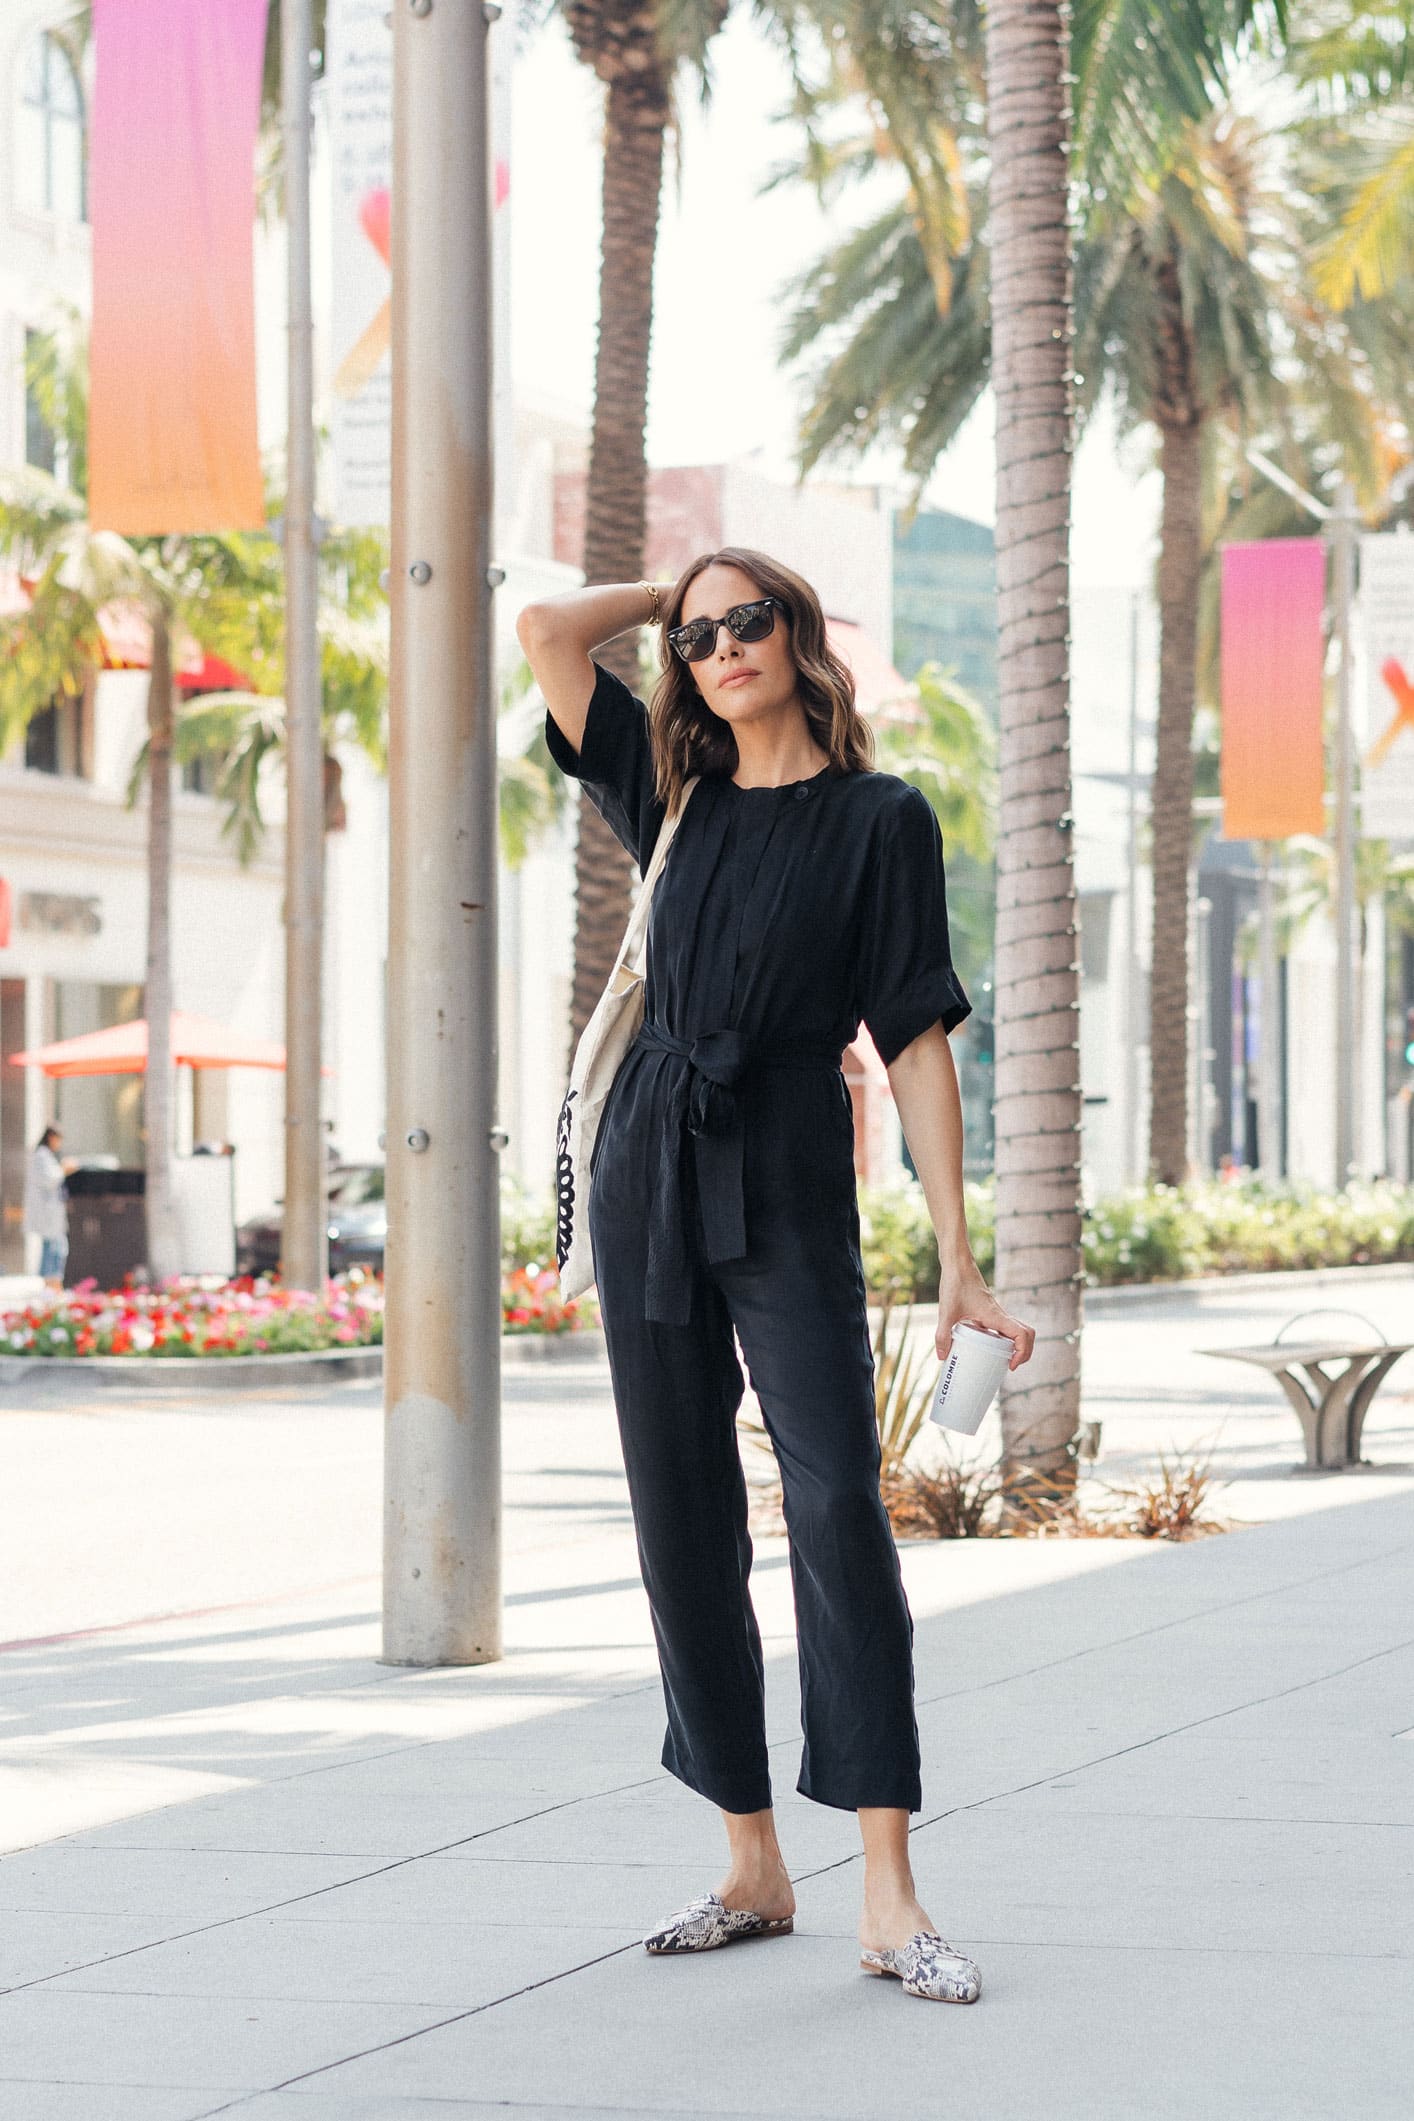 Louise Roe of Front Roe discusses her favorite Fall jumpsuits